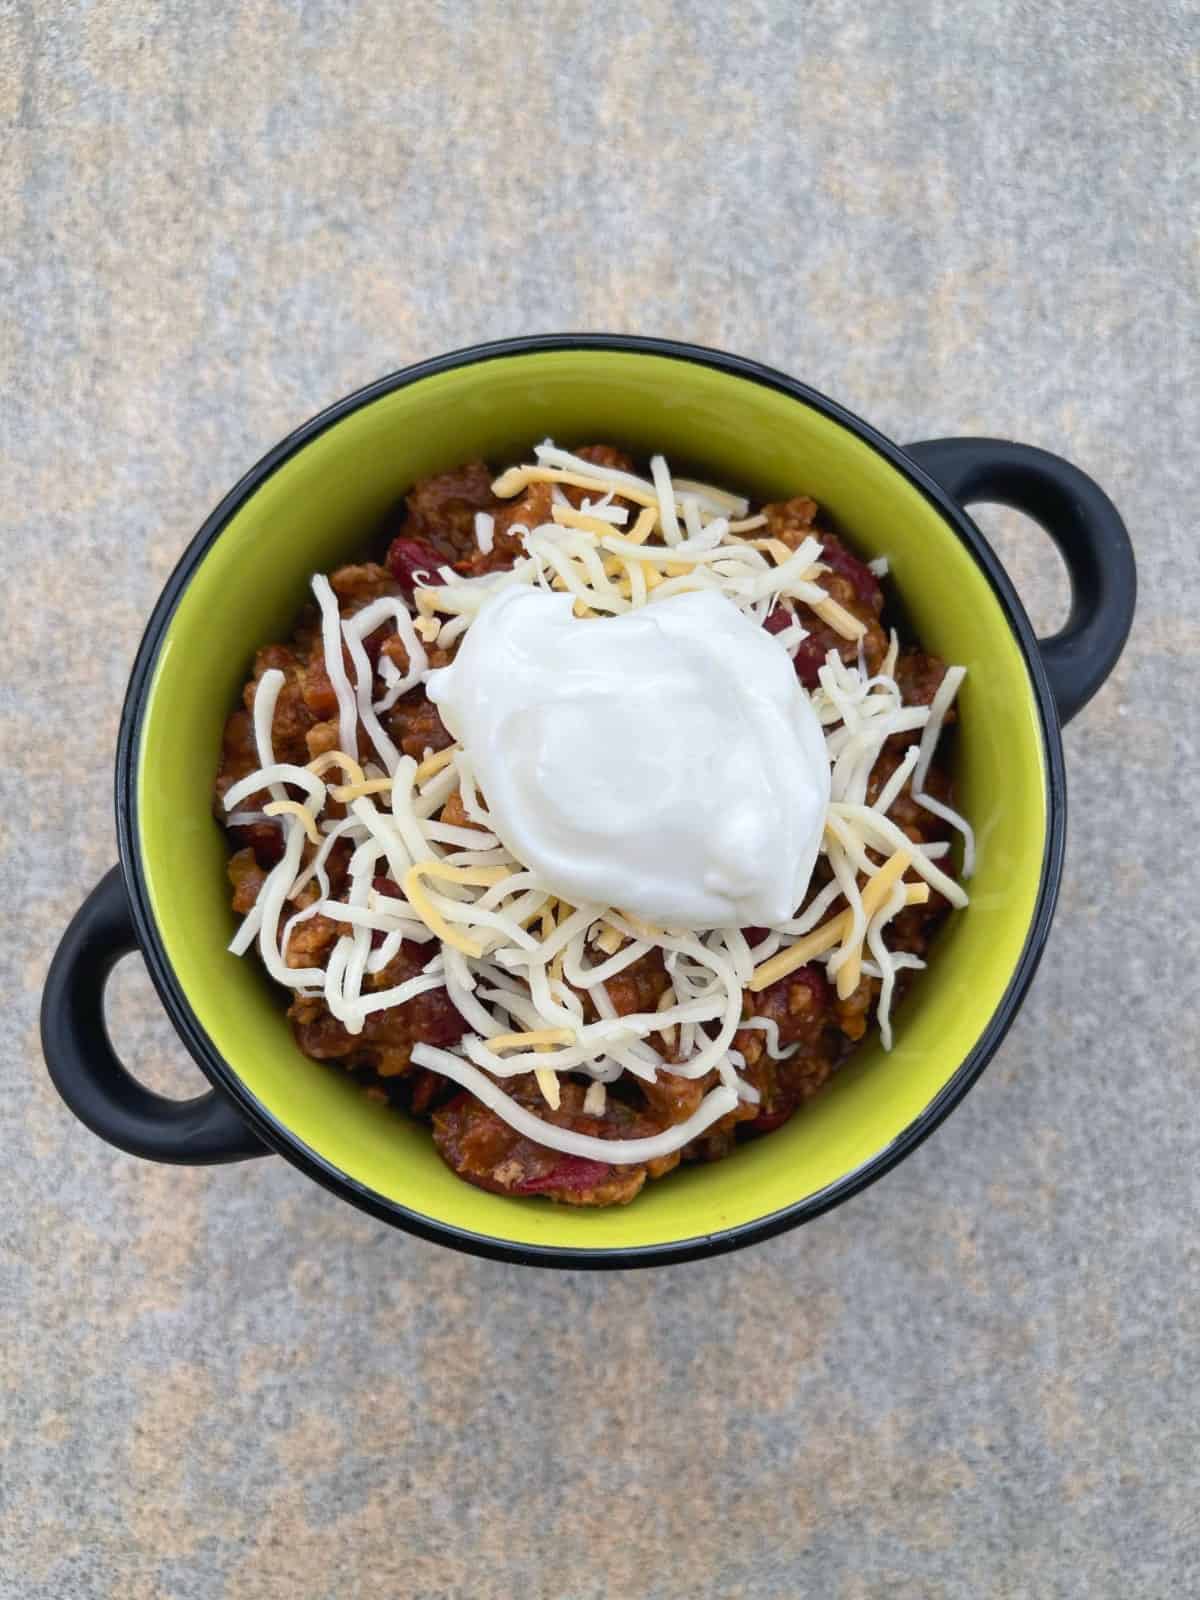 Meatless Quorn chili in green crock topped with shredded cheese and lite sour cream from above.